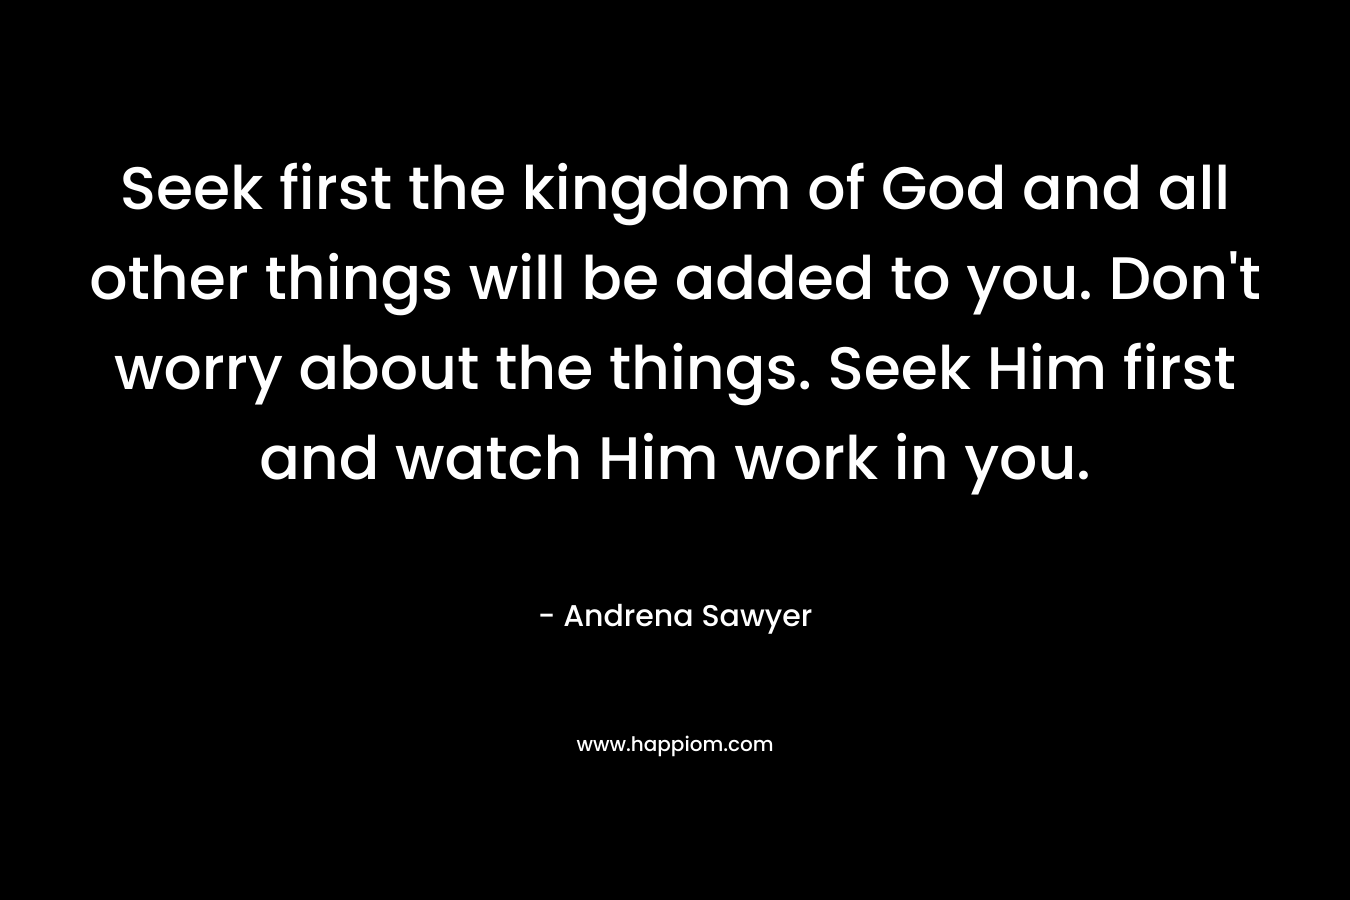 Seek first the kingdom of God and all other things will be added to you. Don't worry about the things. Seek Him first and watch Him work in you.